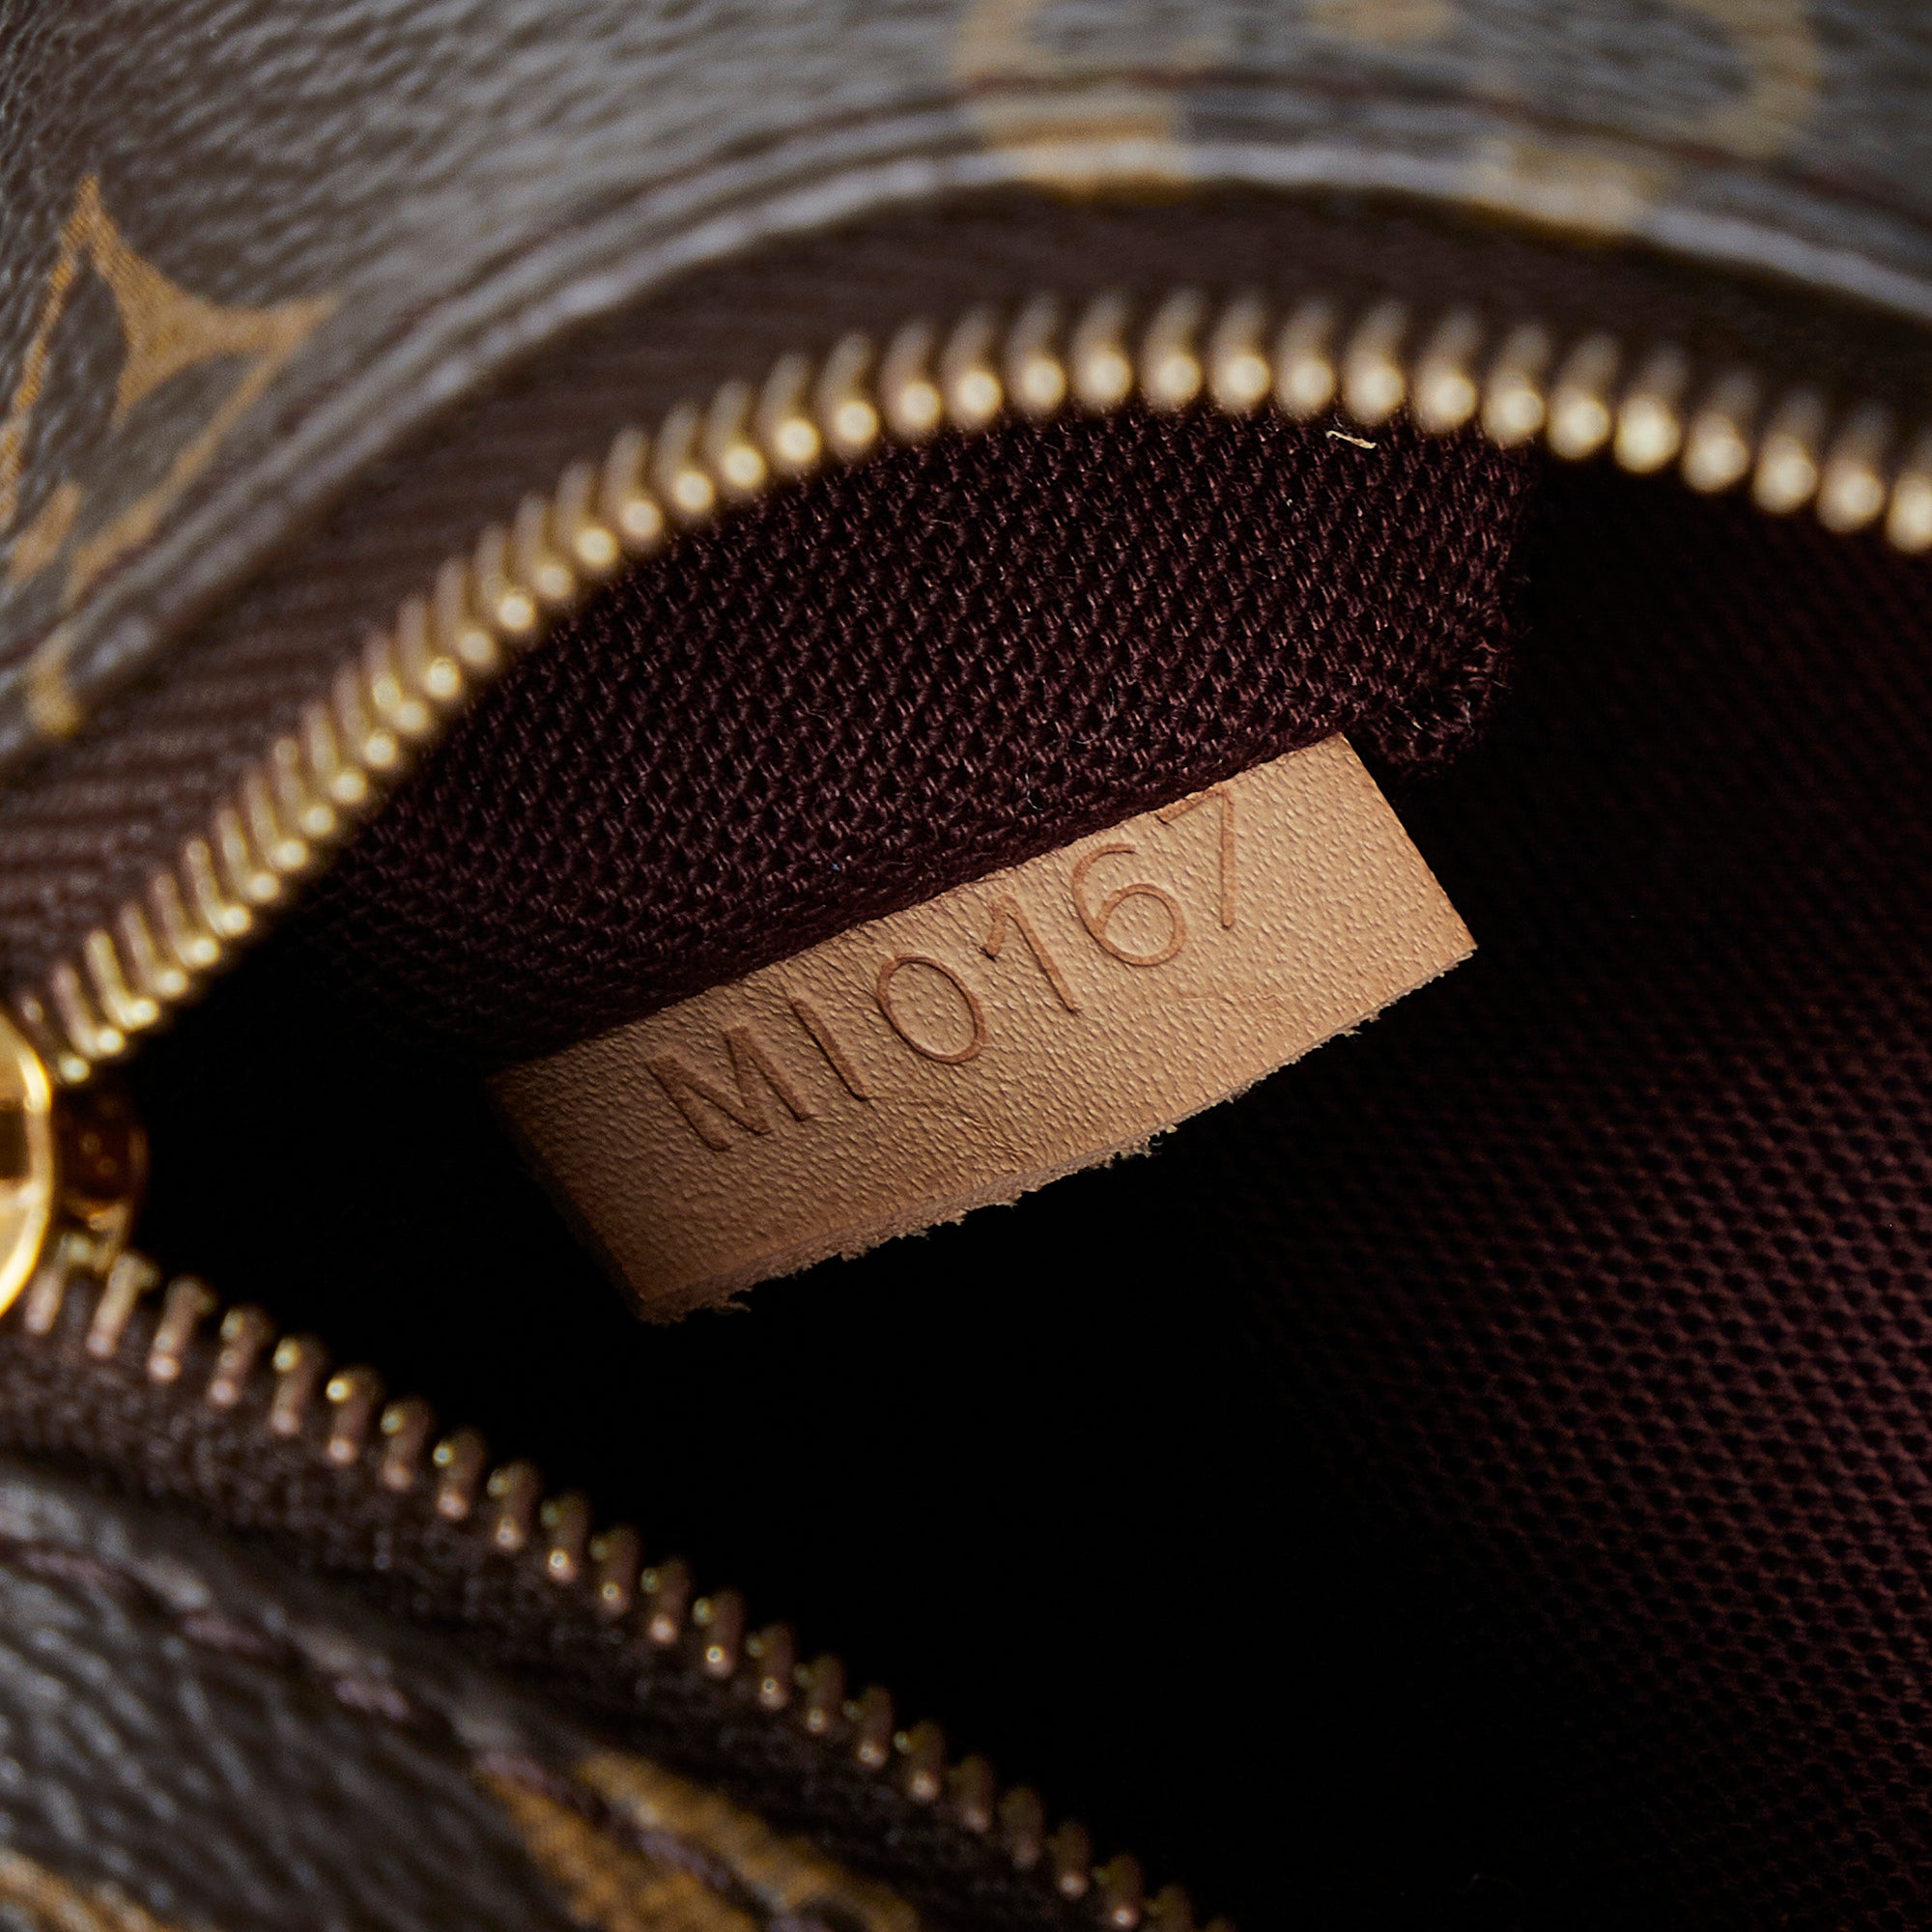 A Complete Guide to Louis Vuitton Date Codes 500 Photo Examples   Bagaholic